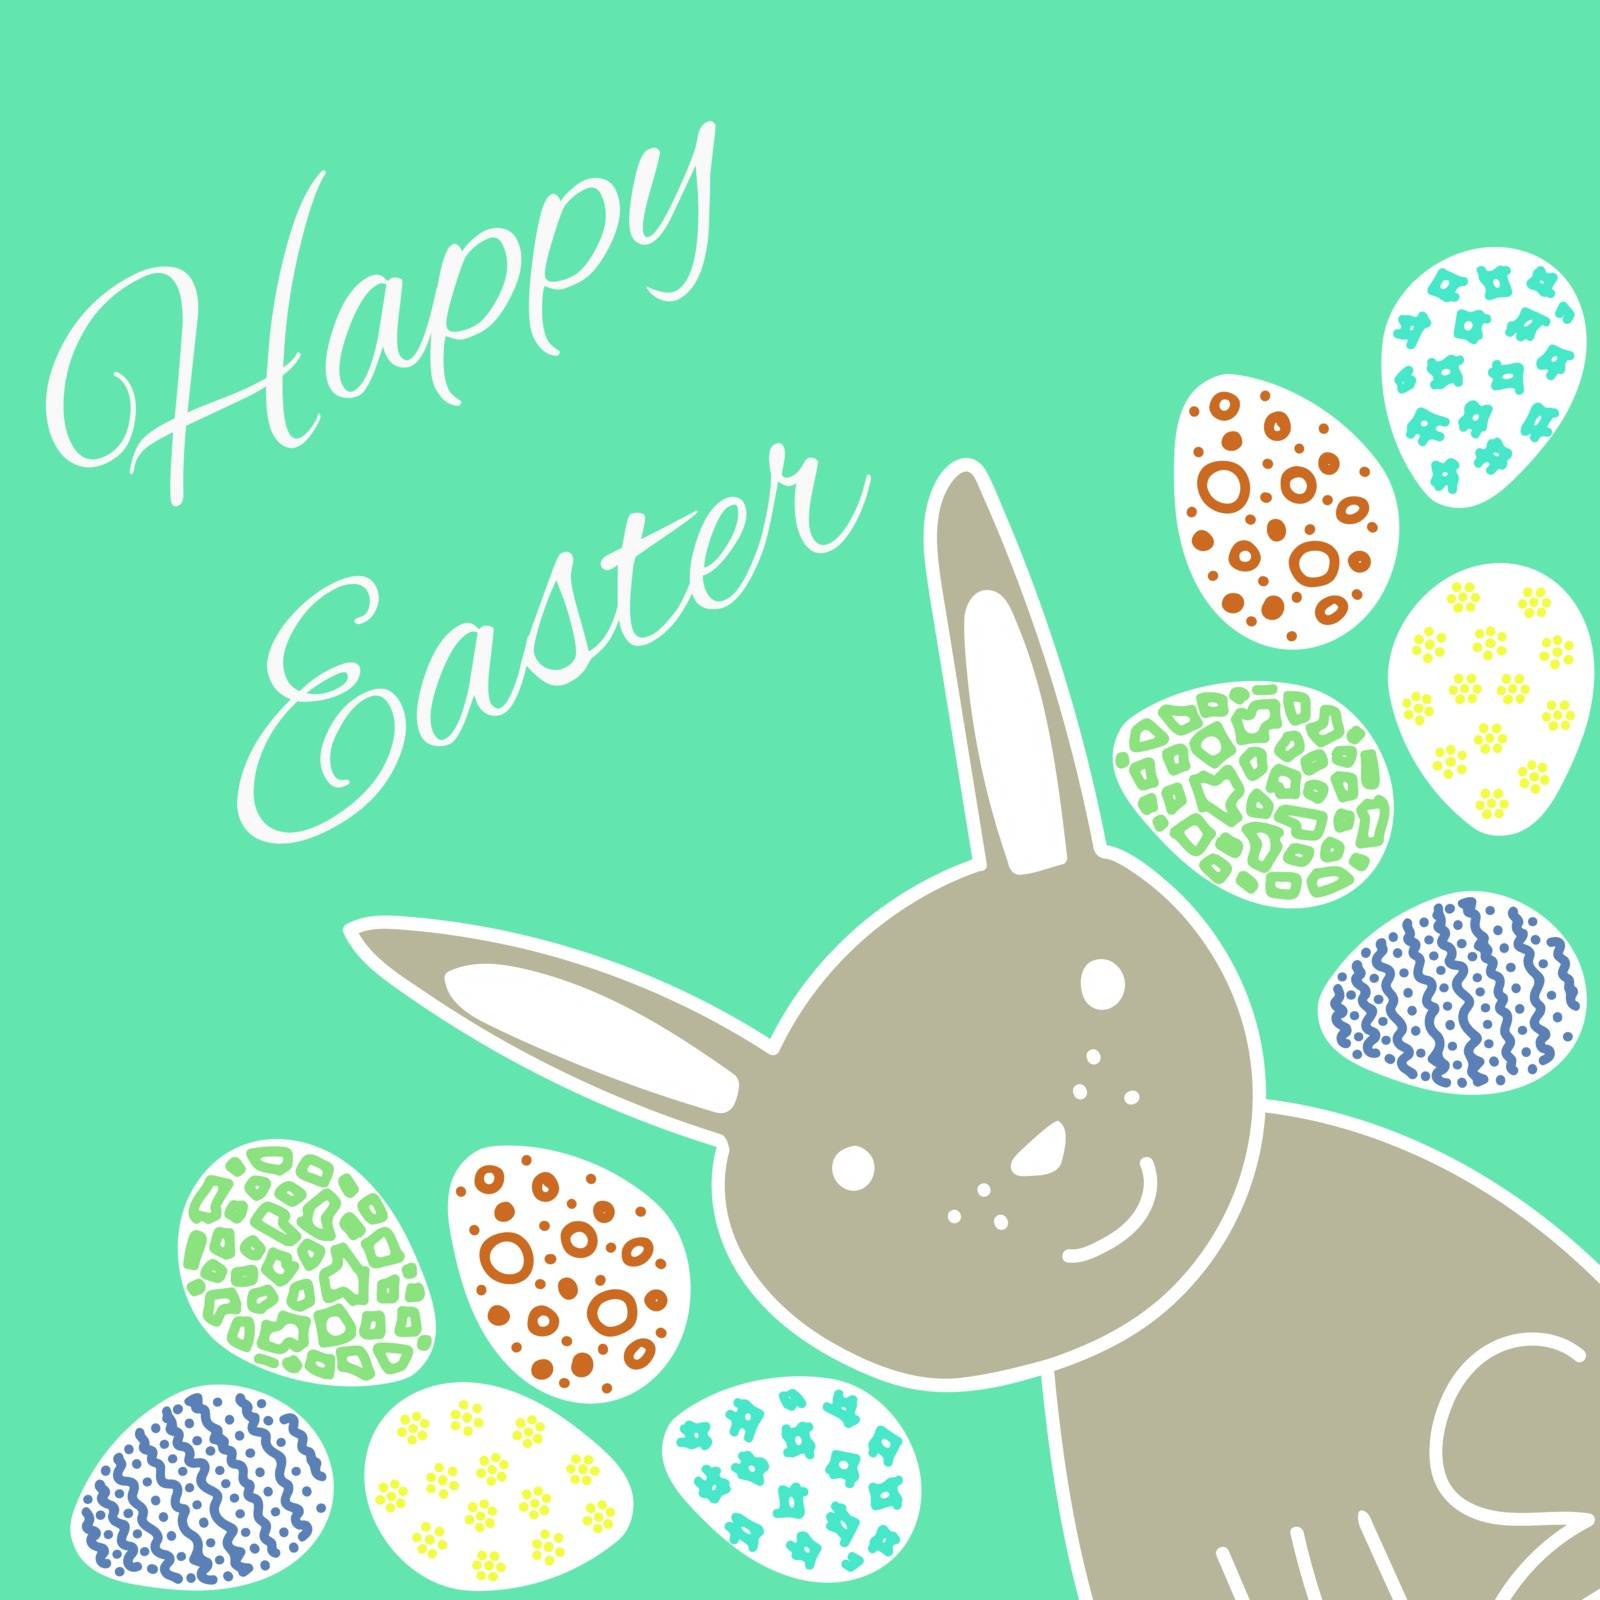 Happy Easter Card with Rabbit and Eggs by tatahnka